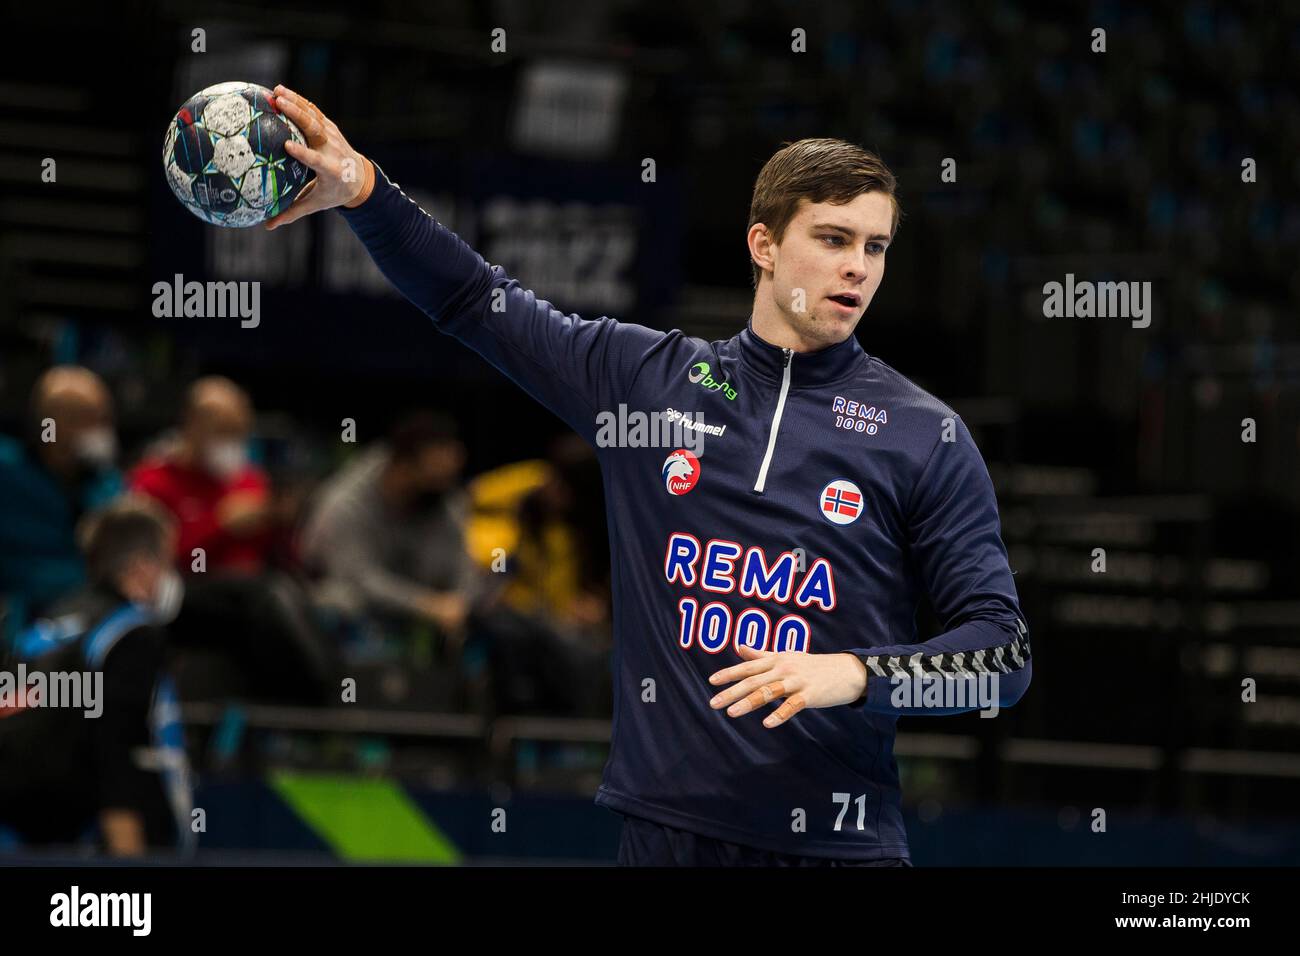 Budapest, Hungary, 28th January 2022. Alexander Christoffersen Blonz of Norway warms up during the Men's EHF EURO 2022, Fifth Place Match between Iceland v Norway in Budapest, Hungary. January 28, 2022. Credit: Nikola Krstic/Alamy Stock Photo